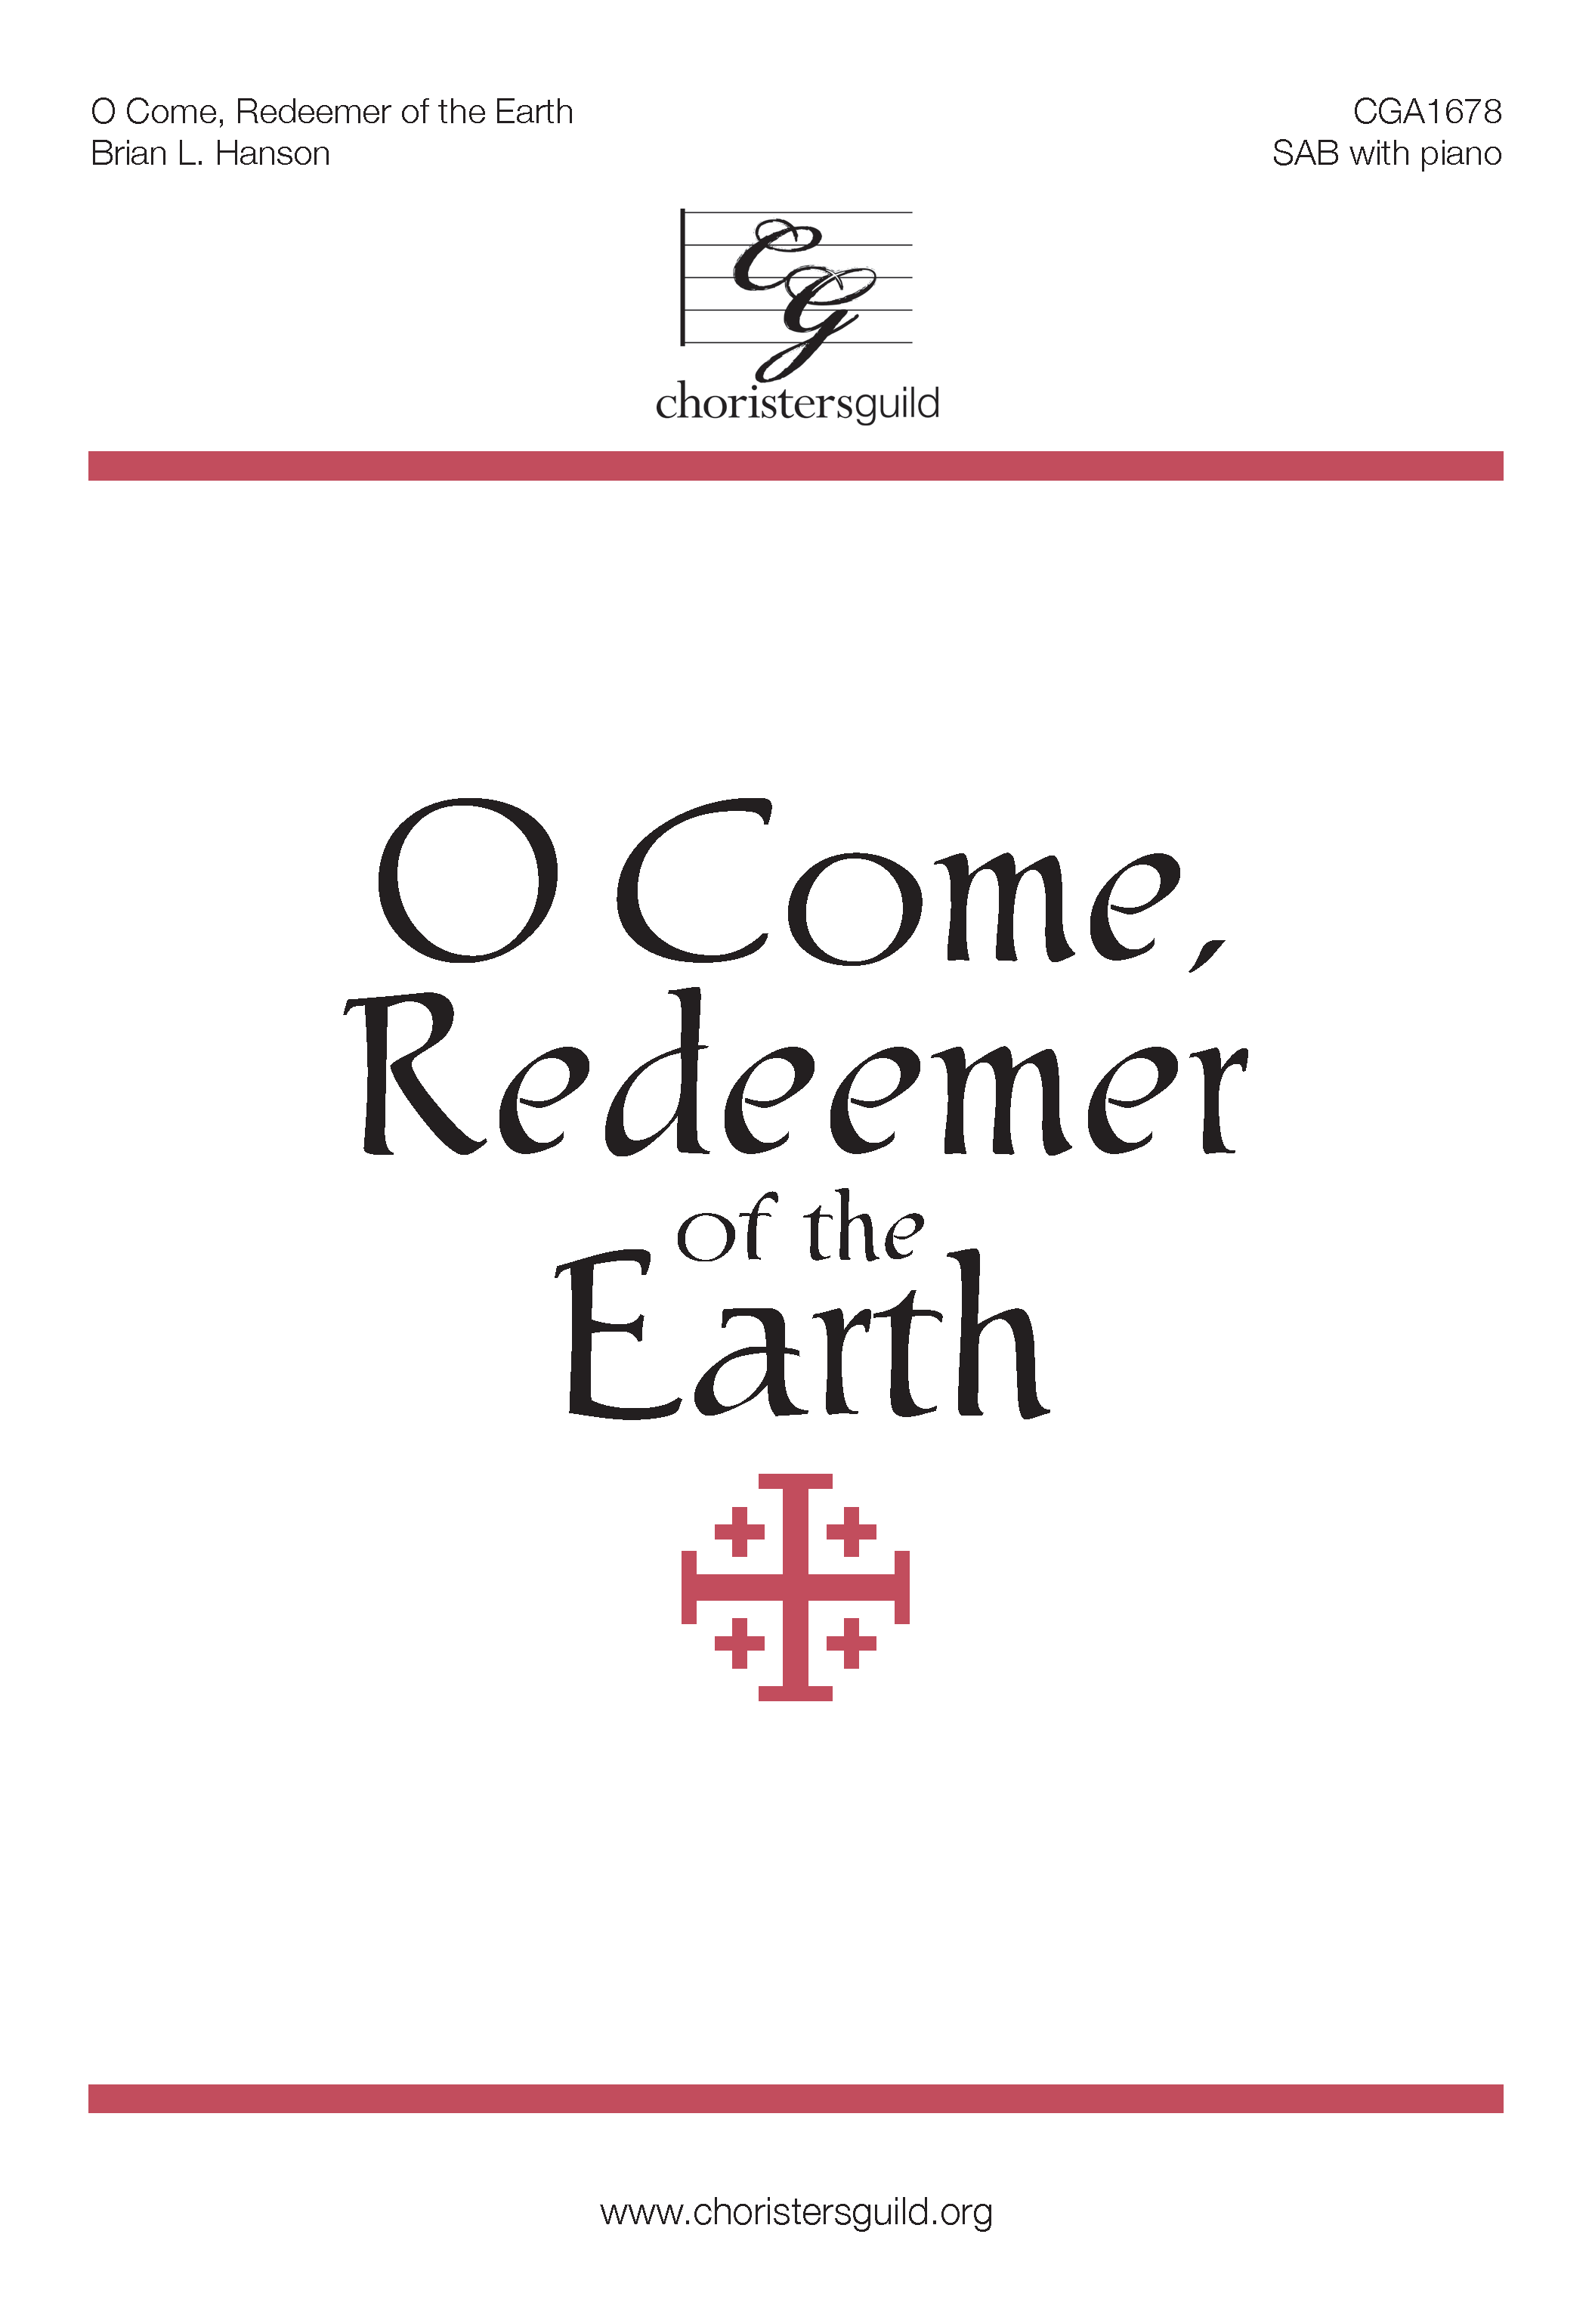 O Come Redeemer of the Earth